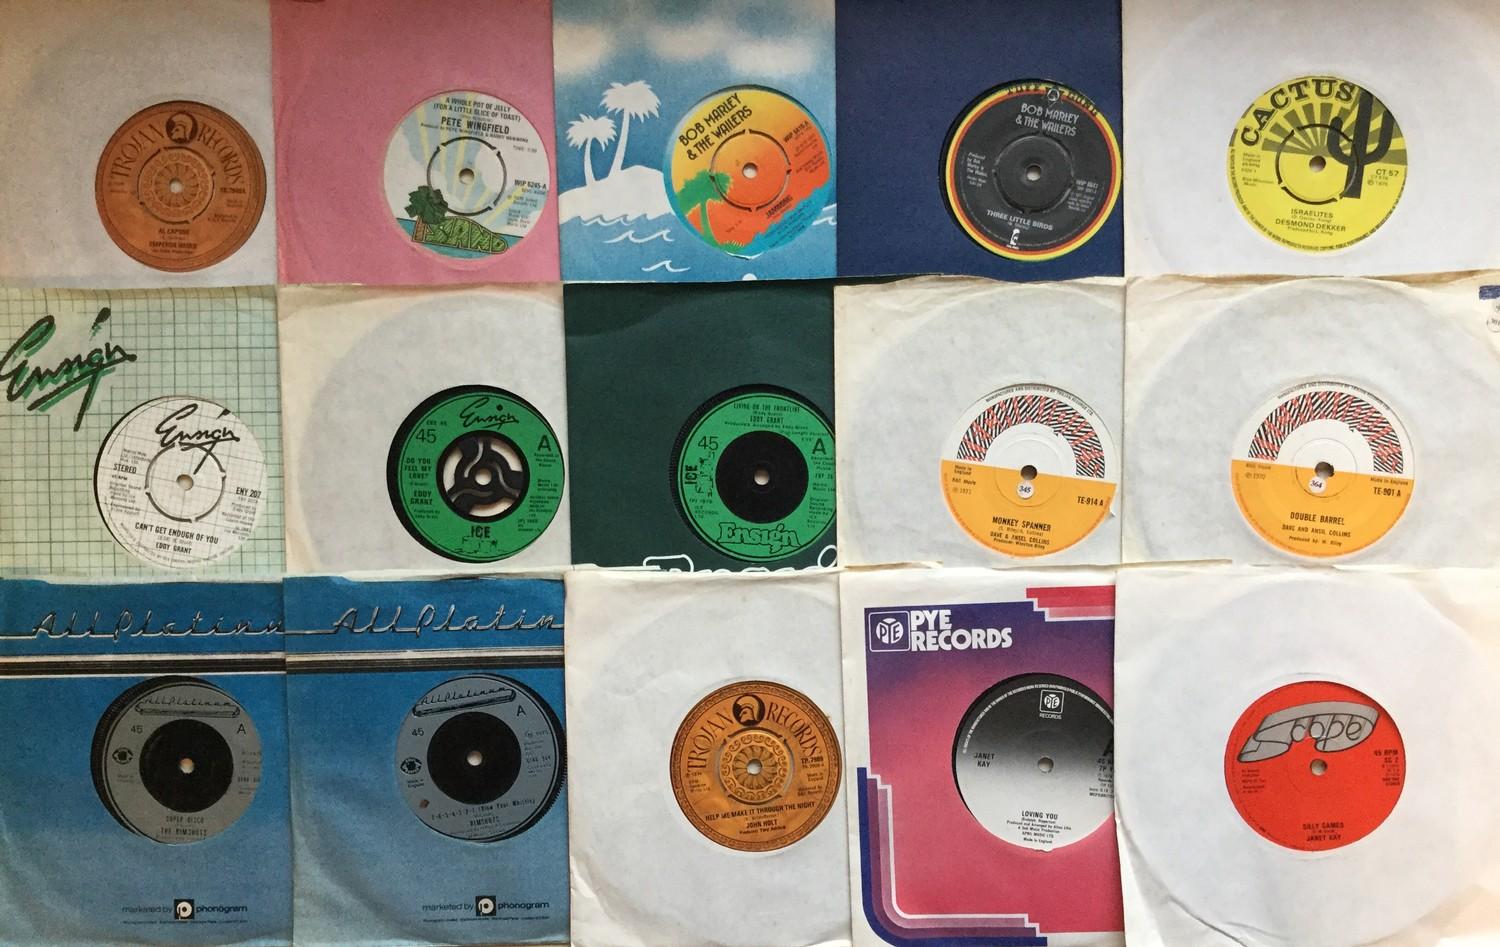 REGGAE VINYL SINGLE 45RPM RECORDS. Fab set of 15 toons here from artist?s to include - Emperor Rosco